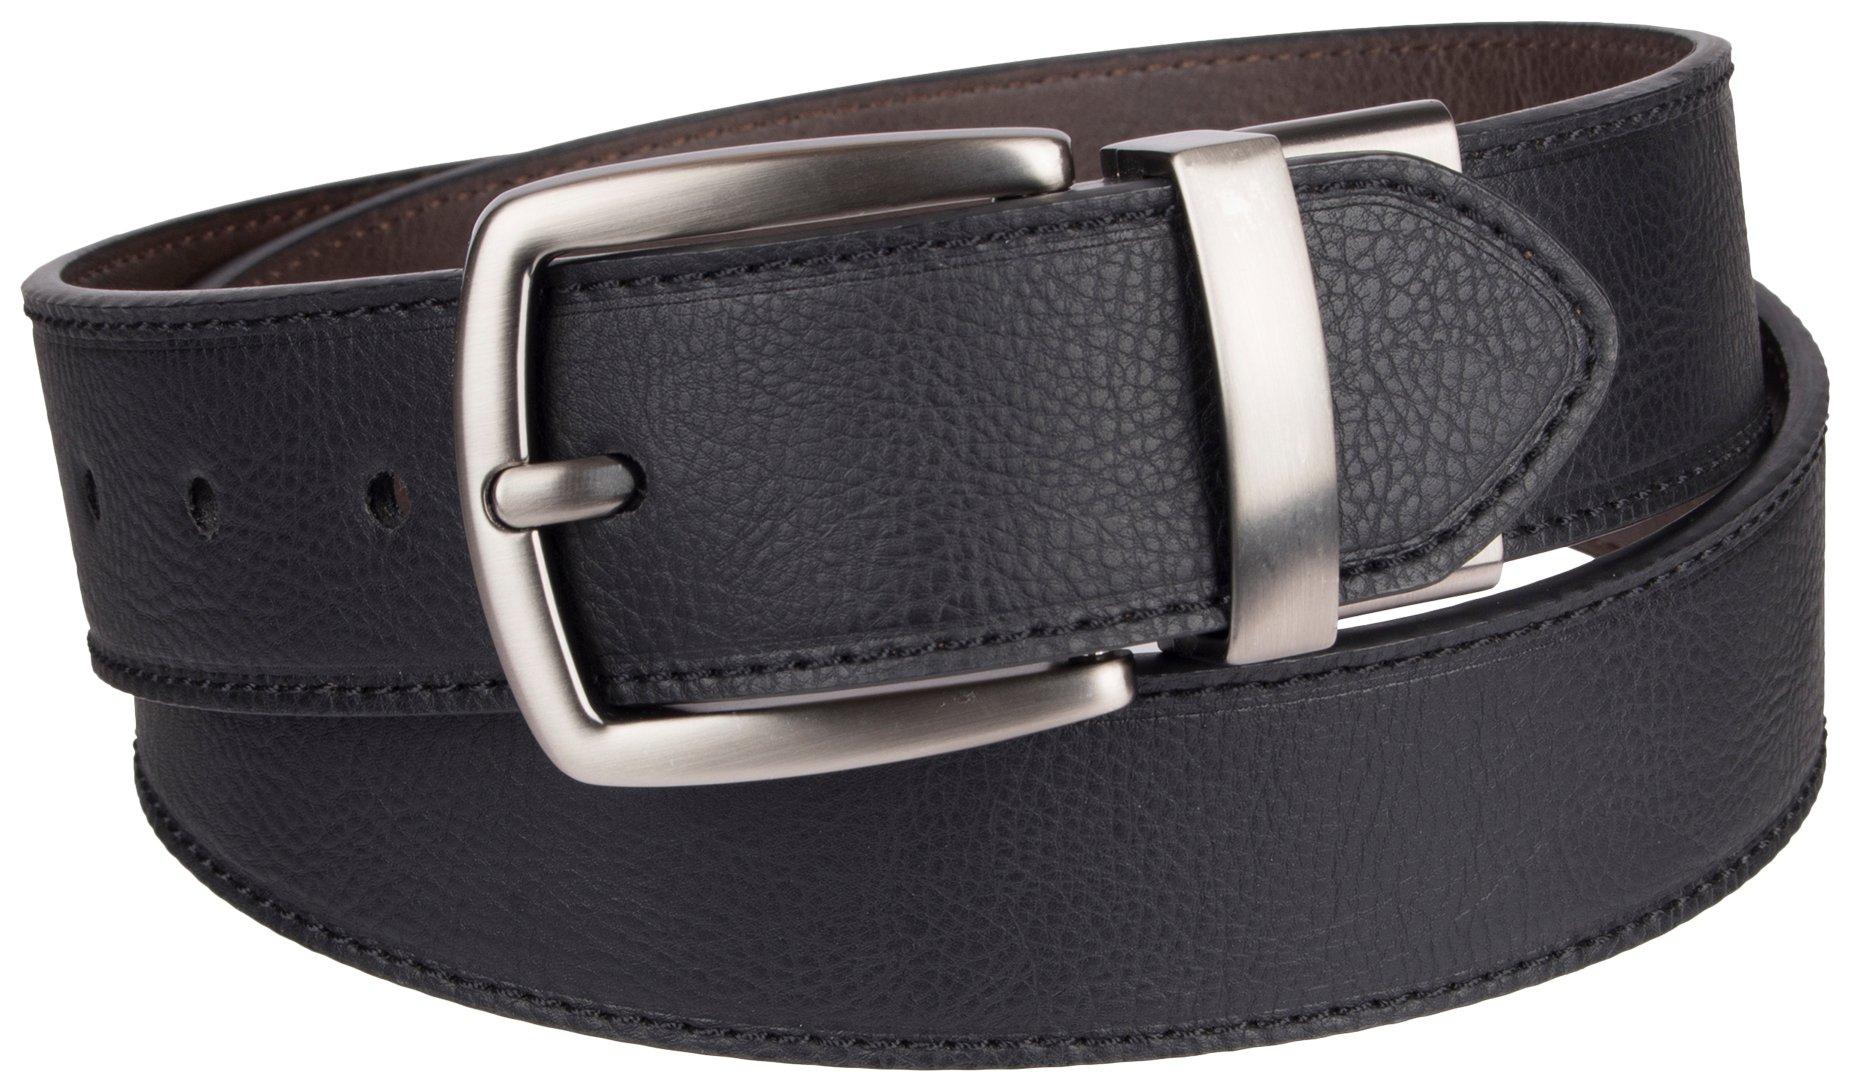 Columbia Mens Braided Two Tone Leather Belt | Bealls Florida